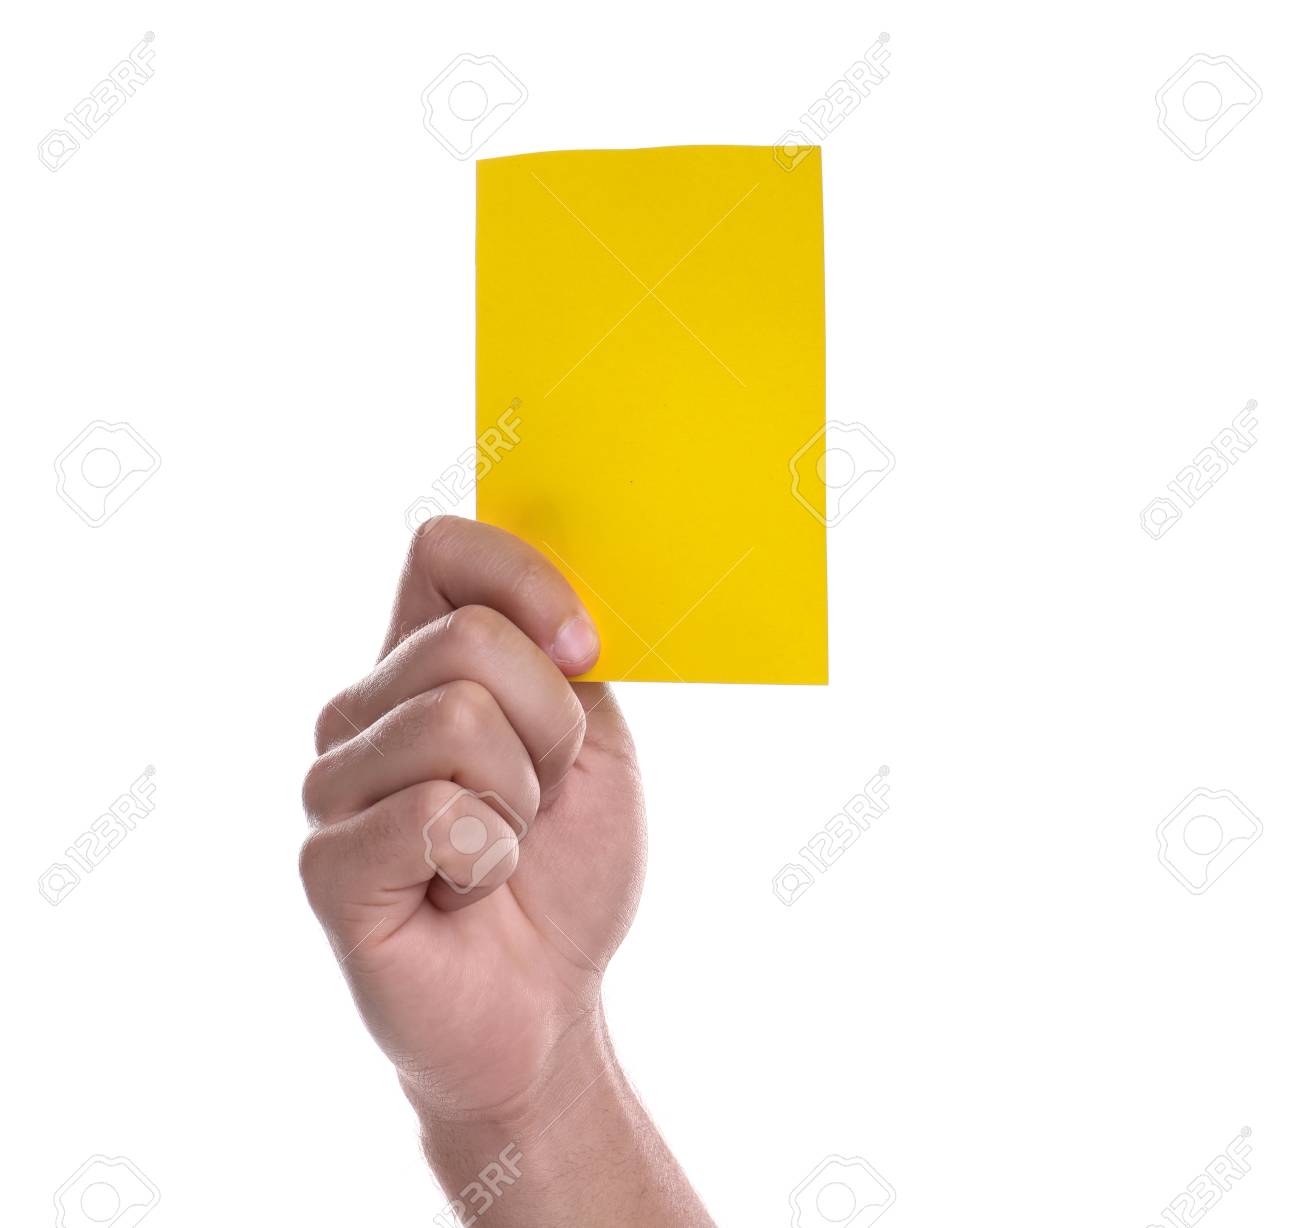 Football Referee Holding Yellow Card On White Background Closeup